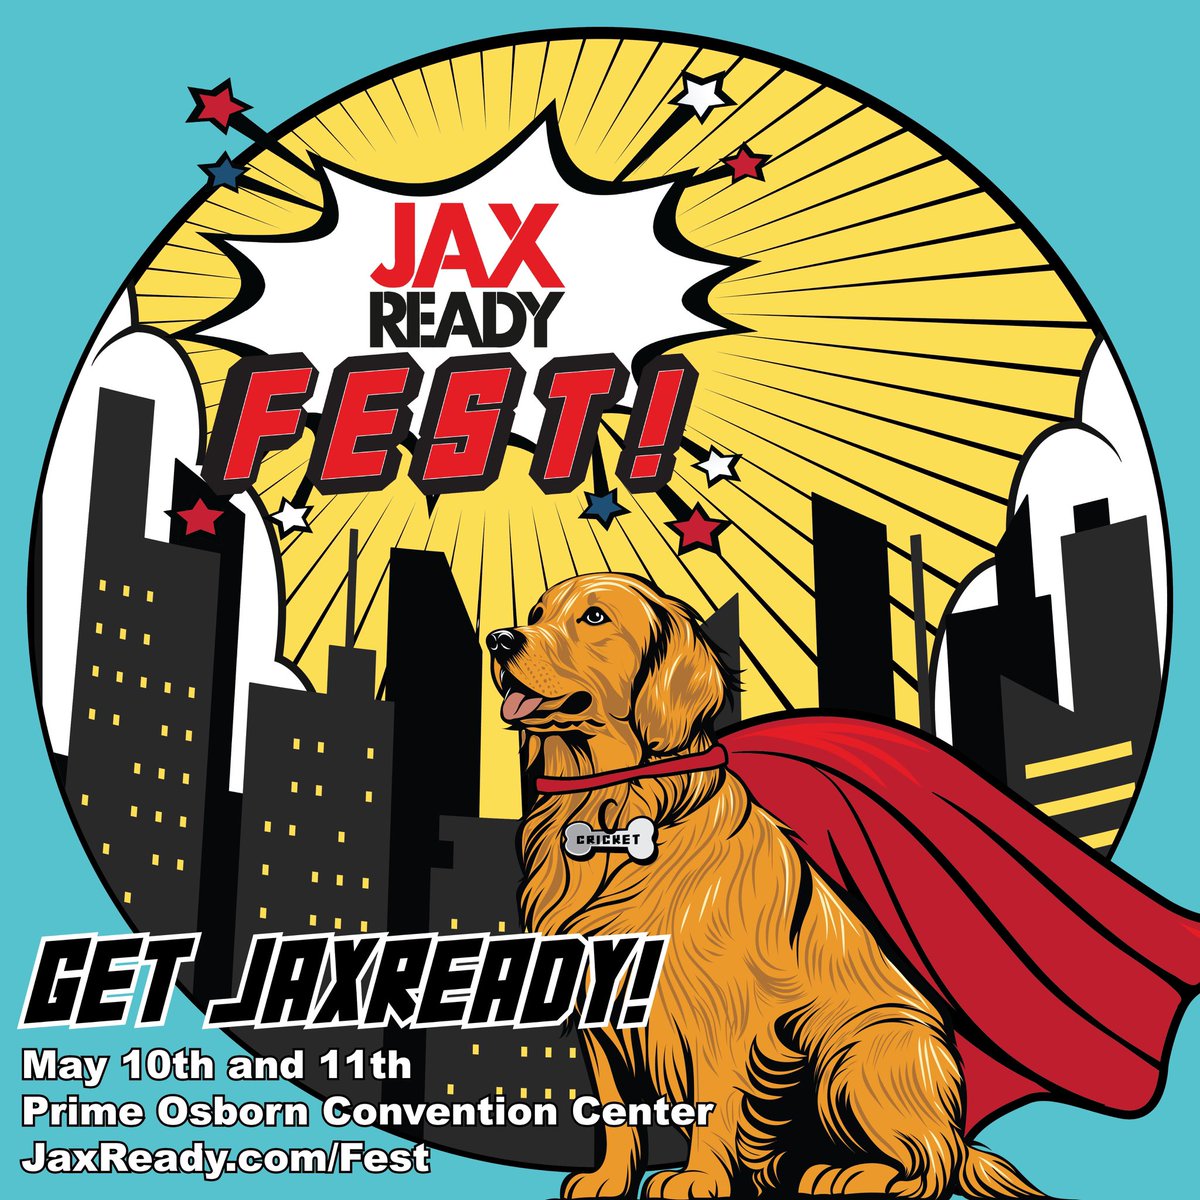 Stamp your passport for preparedness next Friday & Saturday at the @JaxReady Fest. Bring your family to the @PrimeOsbornJax where 60+ community agencies and organizations will help you get ready for storm season with free giveaways and demonstrations. jaxready.com/fest#accordion